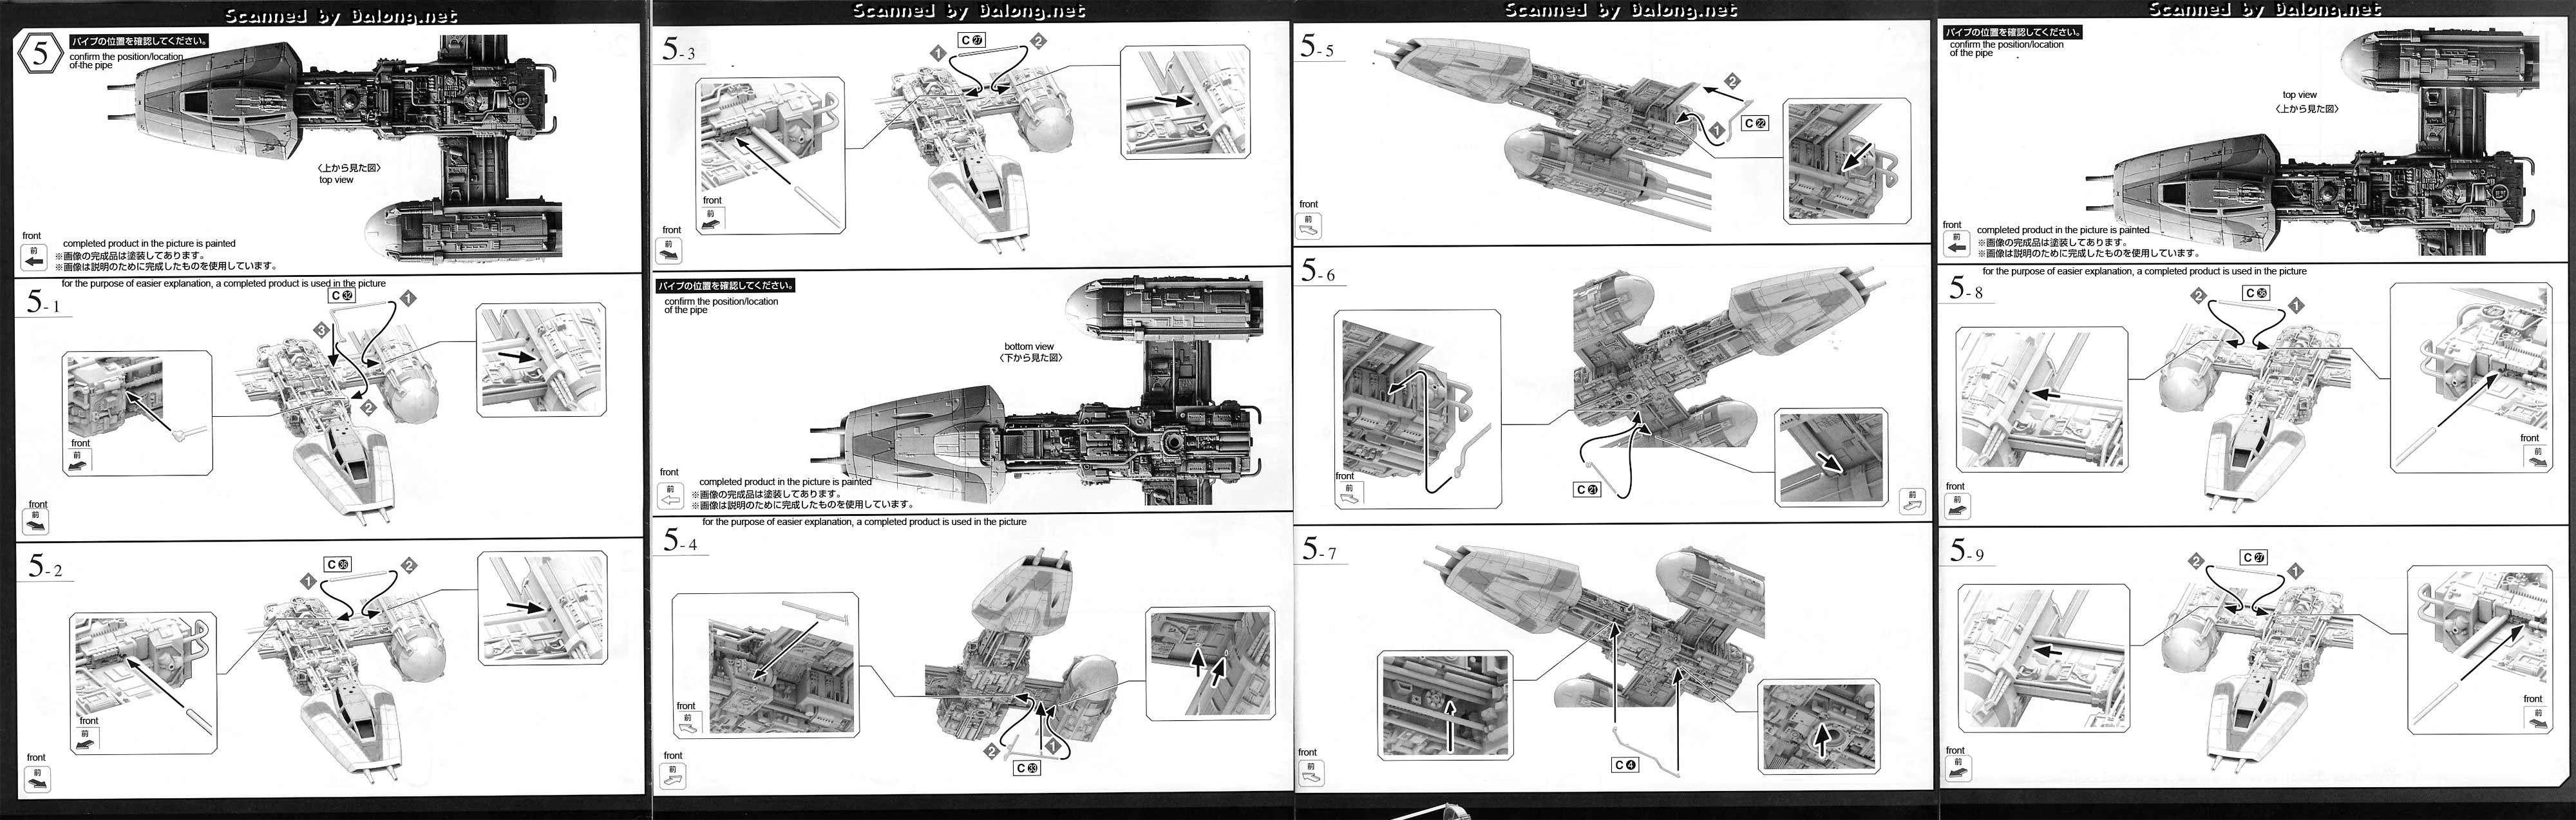 Bandai 1/72 Y-Wing Star Fighter English Manual & Color Guide - Mech9